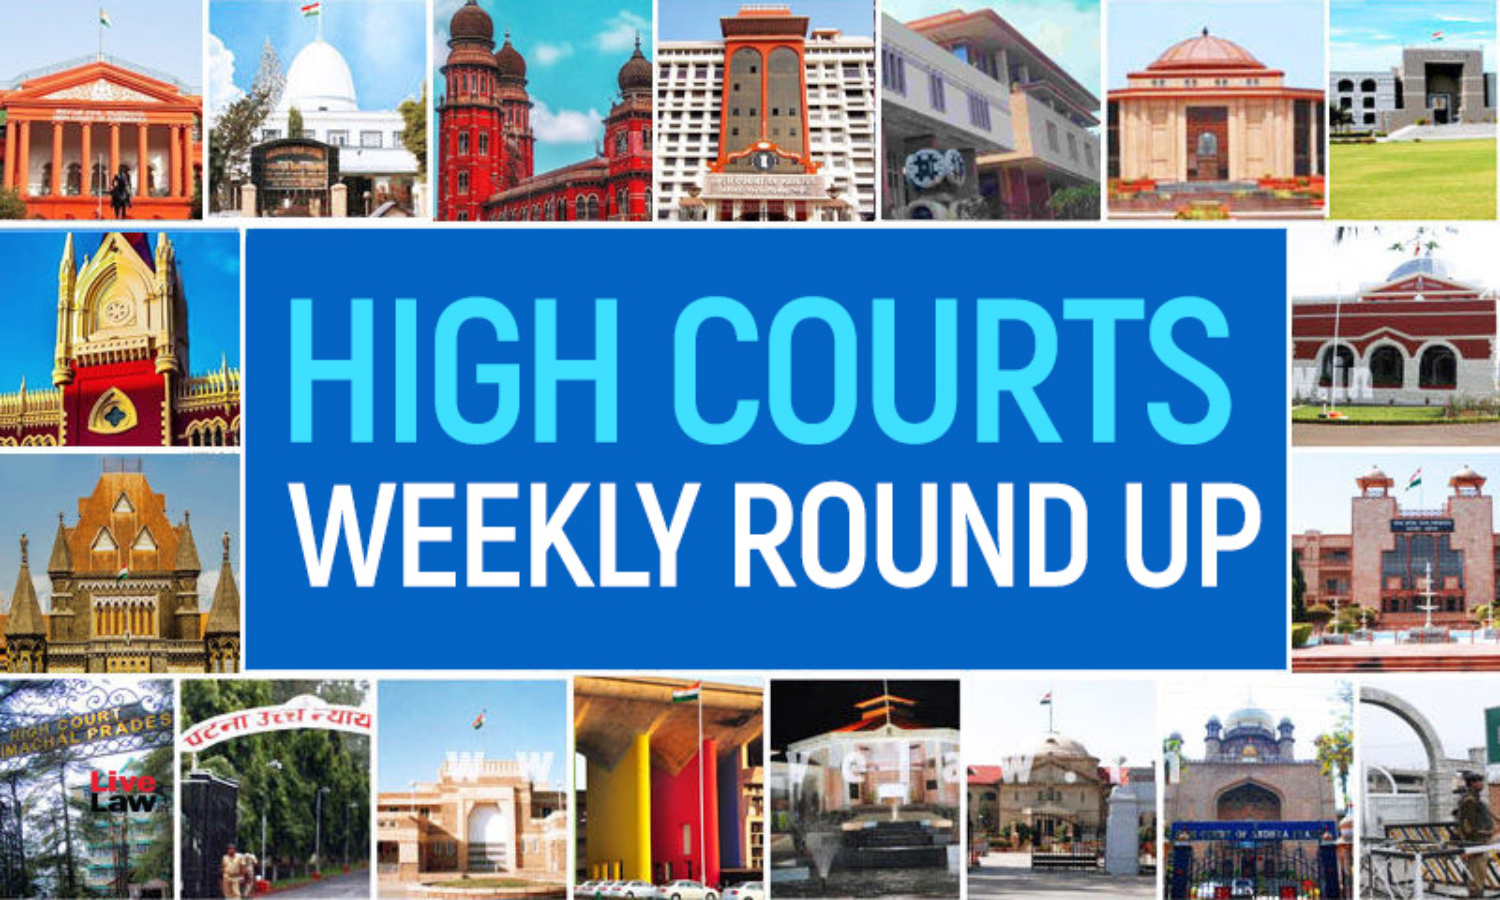 Kanti Sha Rep Sex Video - All High Courts Weekly Round Up [18 July 2022 - 24 July 2022]